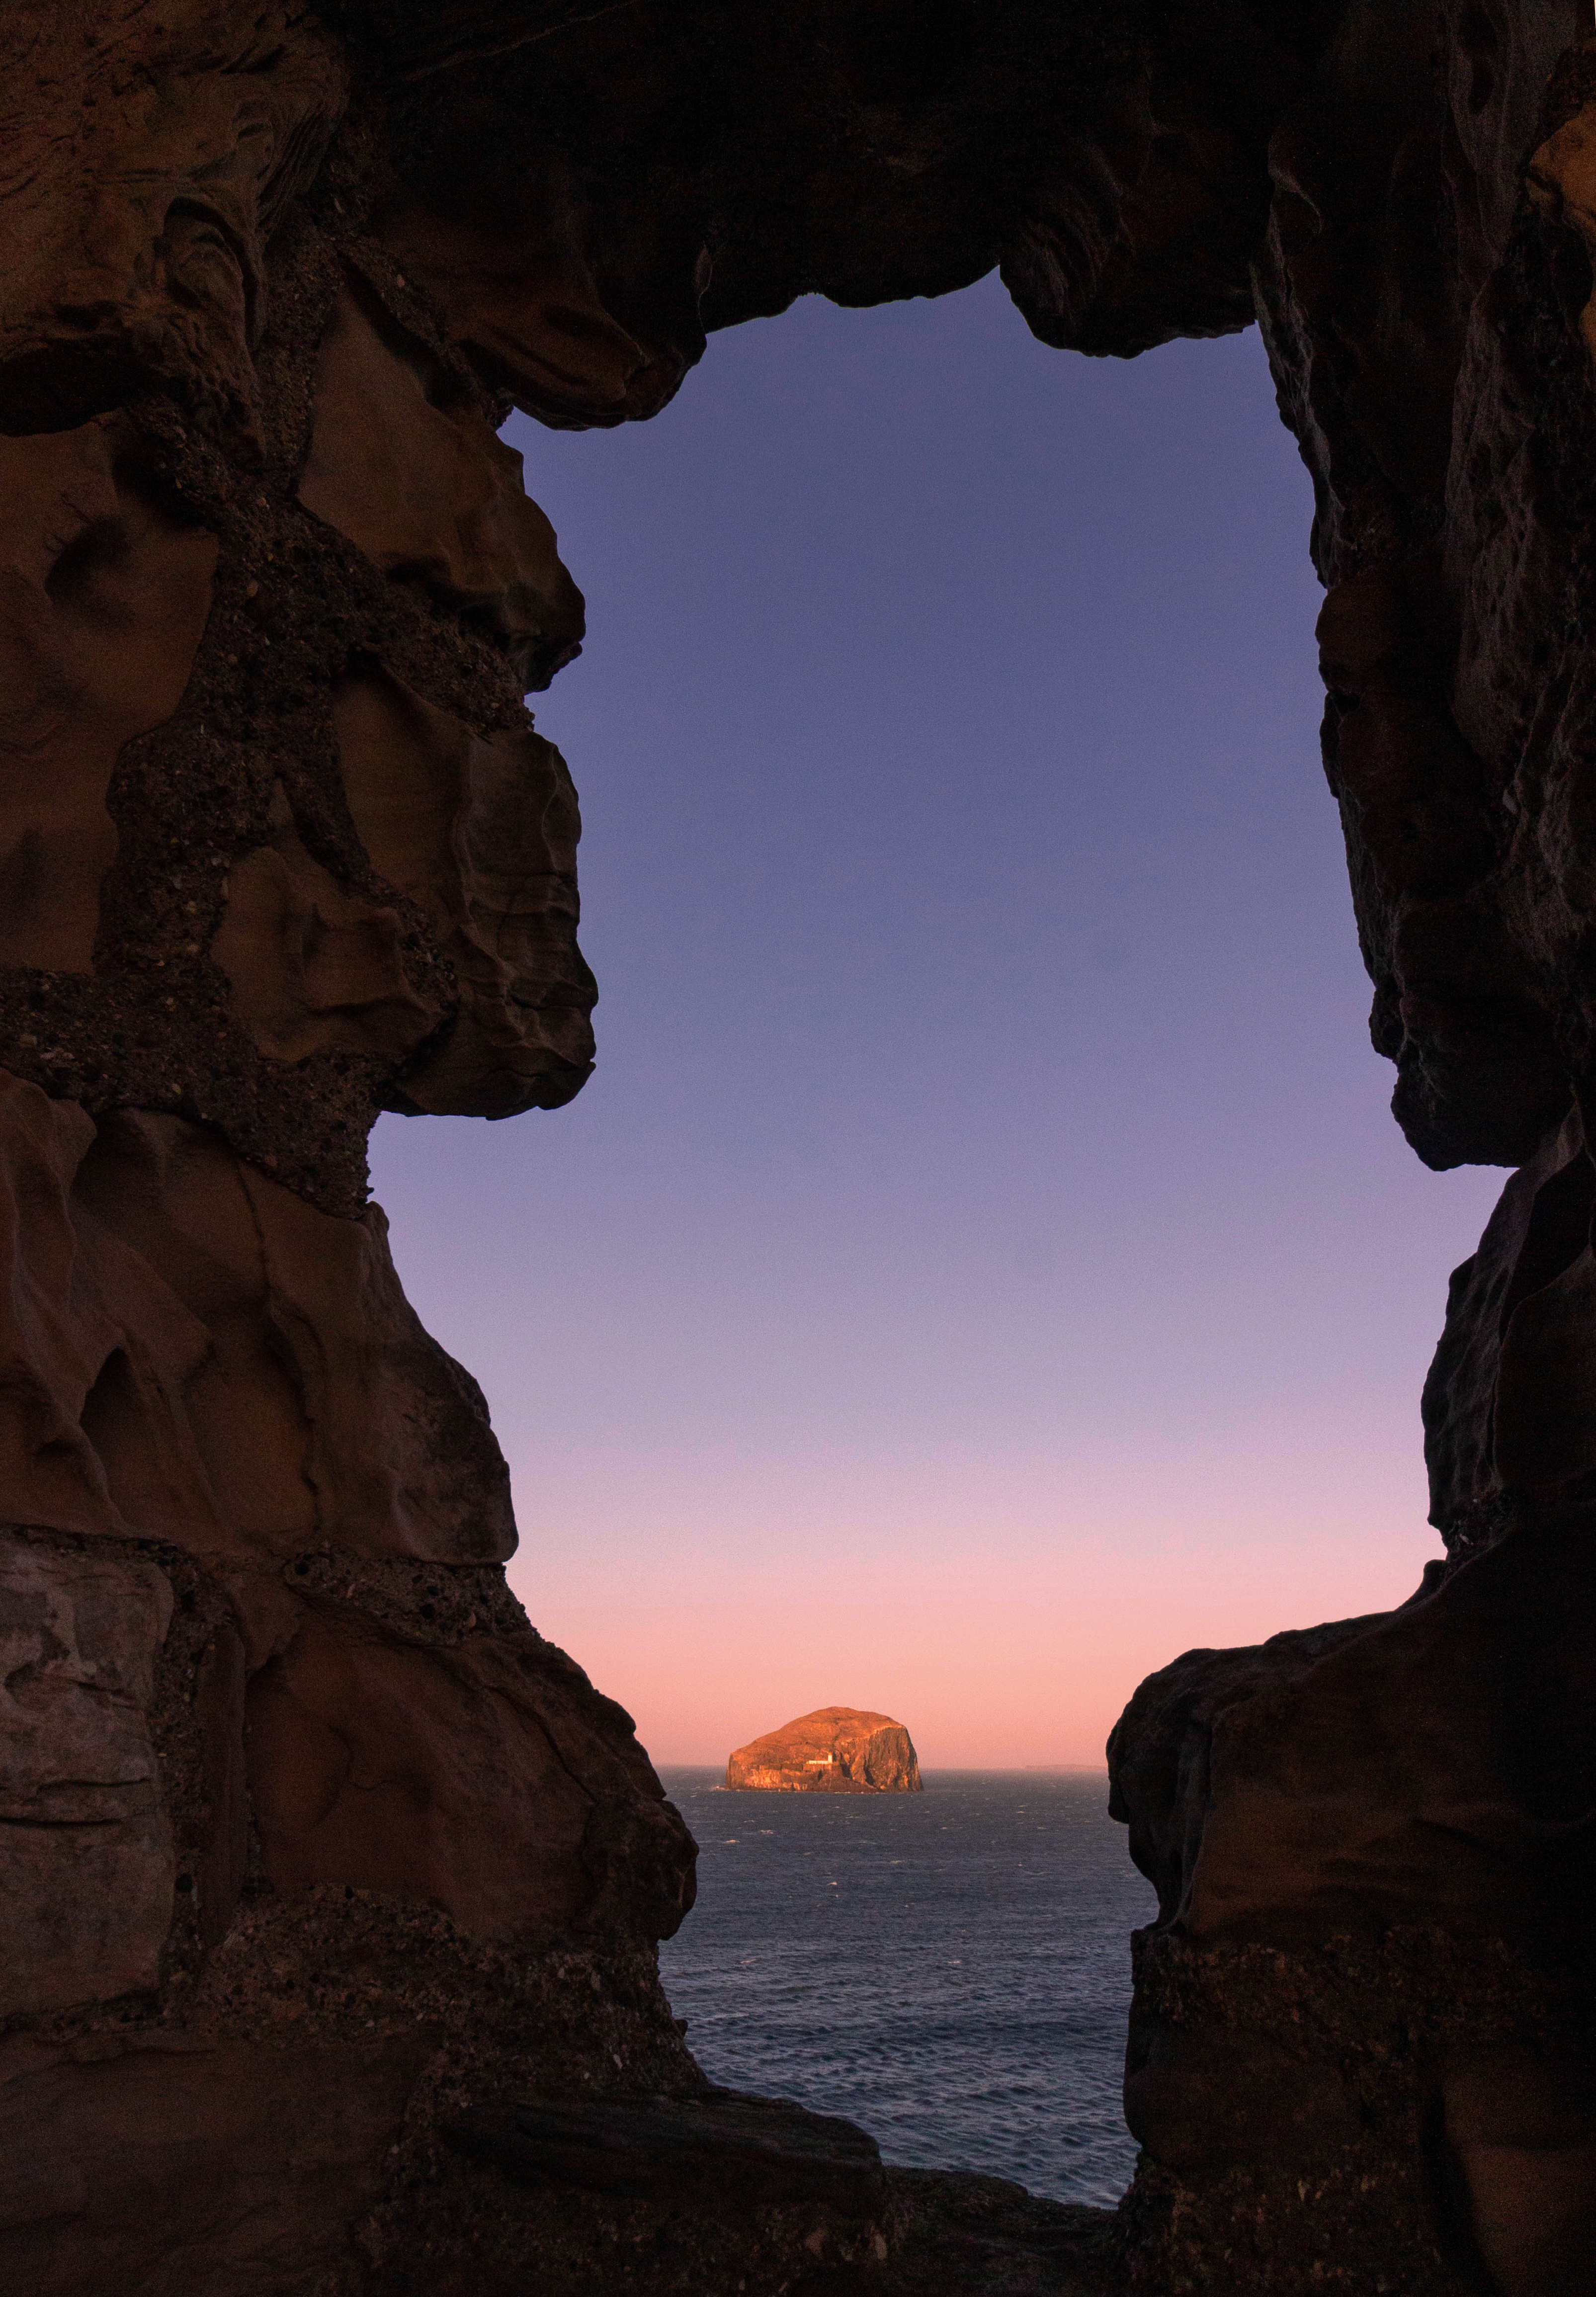 View to Bass Rock from Tantallon Castle at sunset